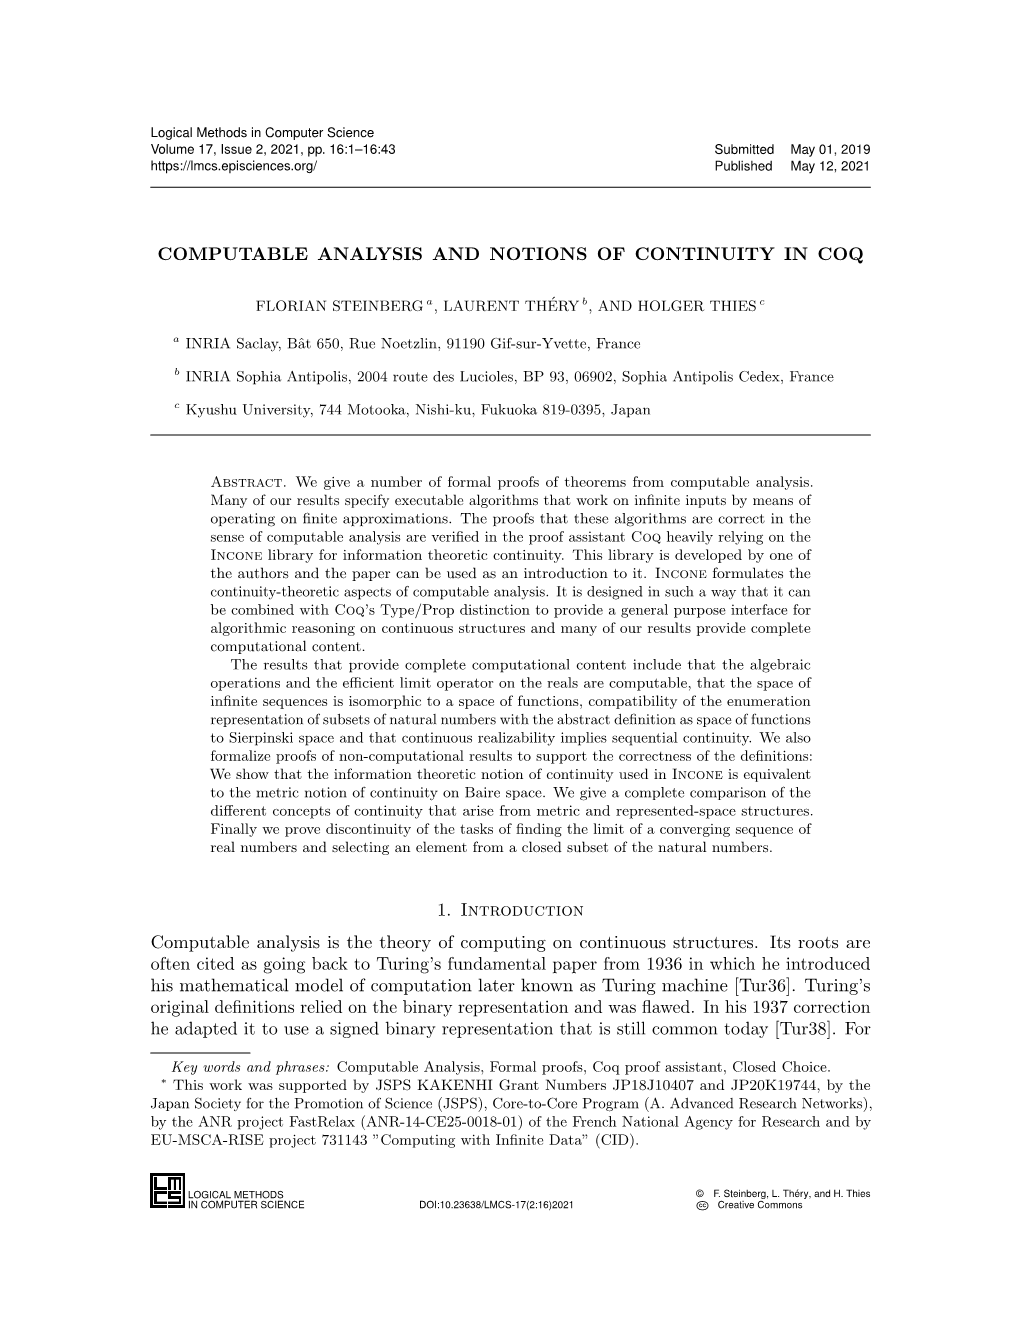 Computable Analysis and Notions of Continuity in Coq